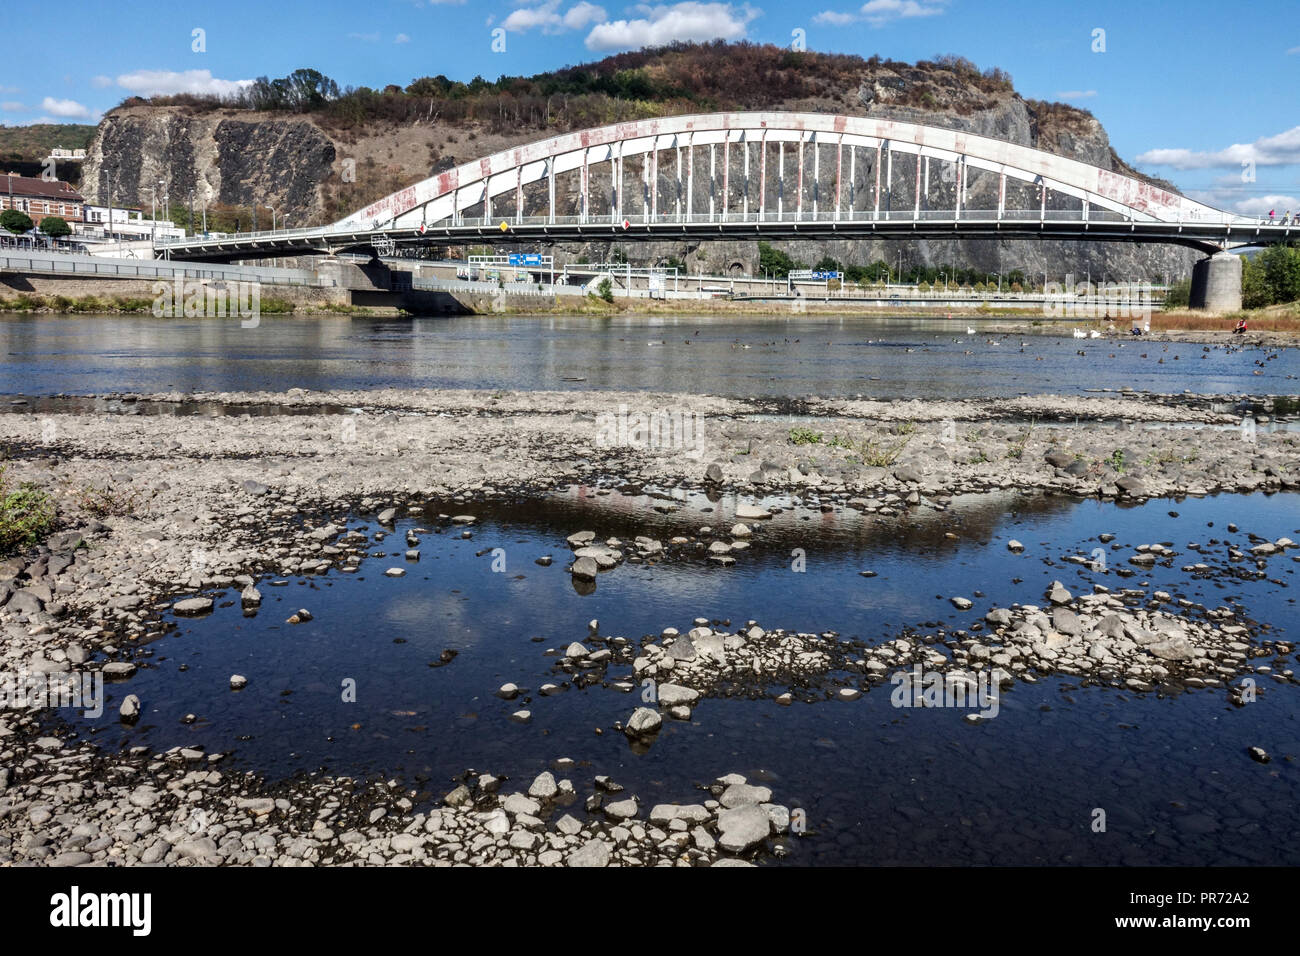 Drought Europe, lack of water in the river bed, Bridge over the Elbe River Usti Nad Labem, Czech Republic Change climate impact, dry river bed Europe Stock Photo